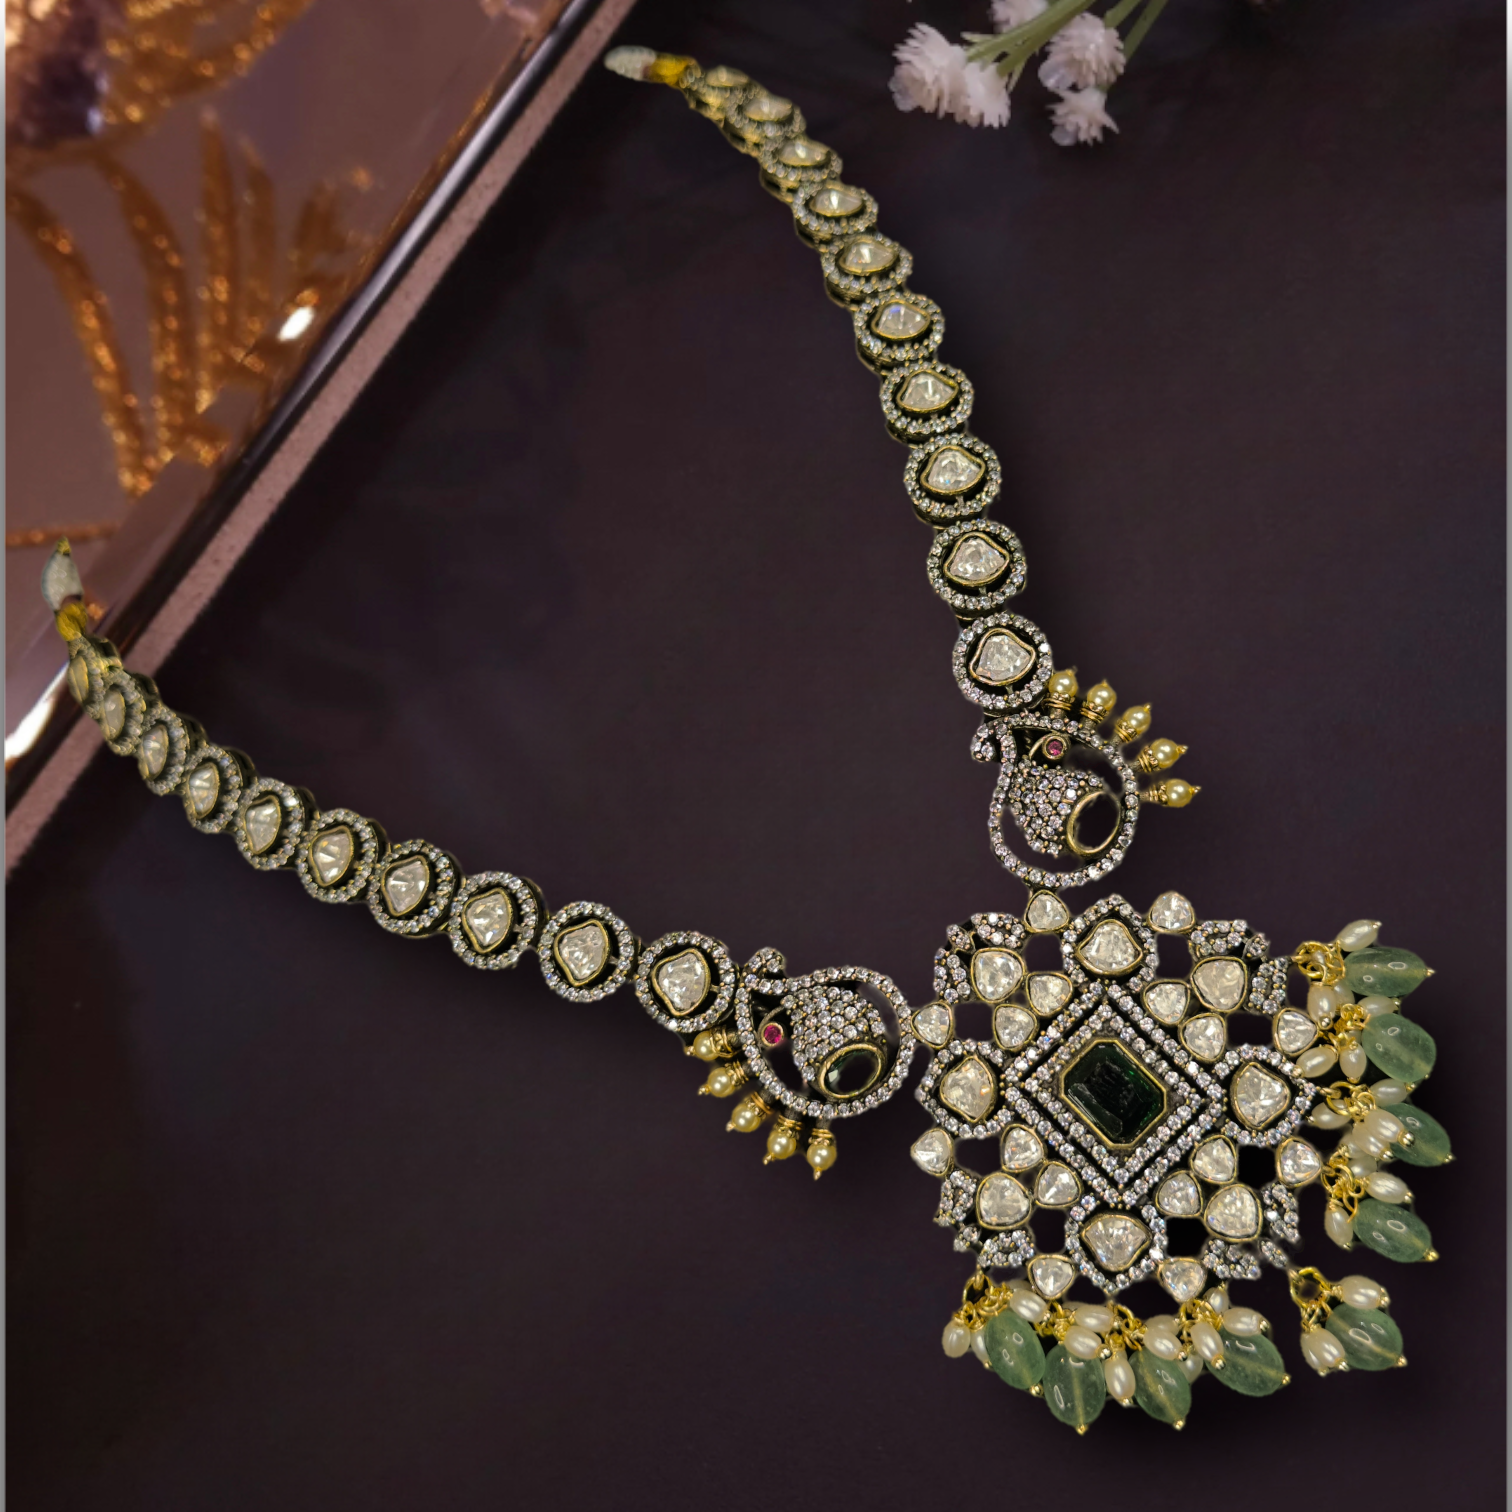 Beautiful Victorian Necklace Set with zircon,moissanite polki stones,pearls, and beads,including matching earrings.This Victorian Jewellery is available in Red & Green  colour variants. 